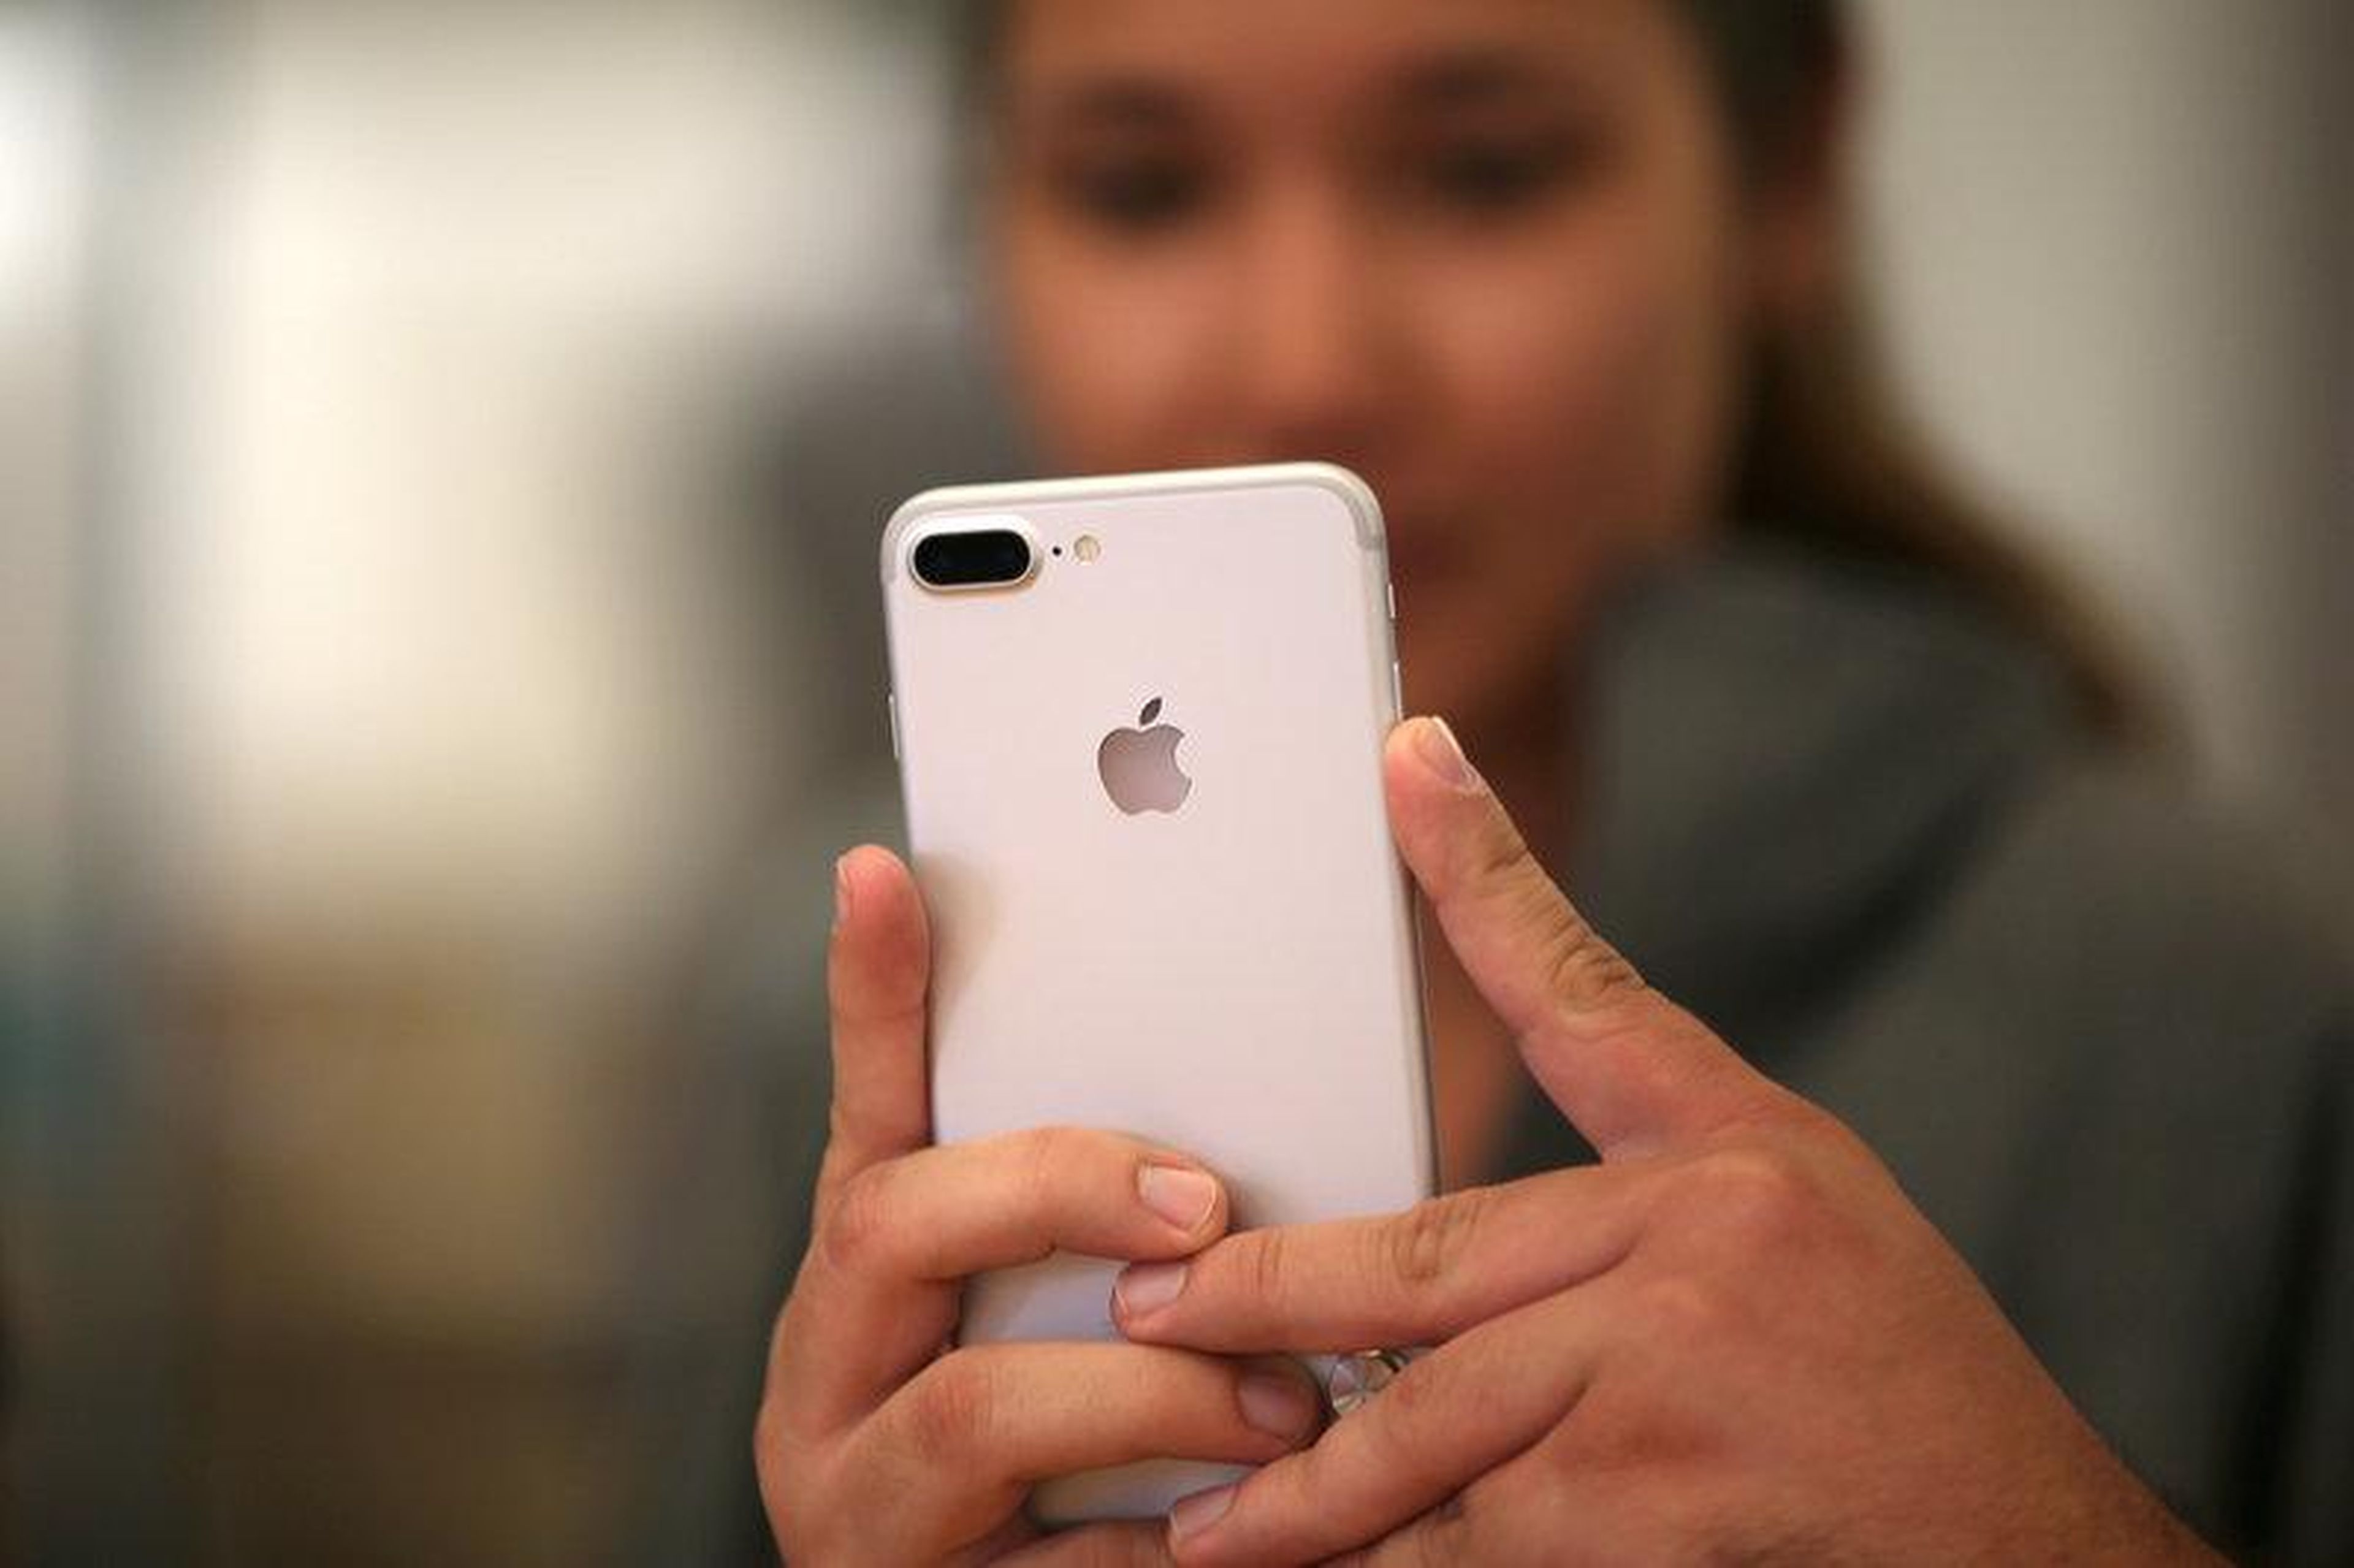 FILE PHOTO: A customer views the new iPhone 7 smartphone inside an Apple Inc. store in Los Angeles